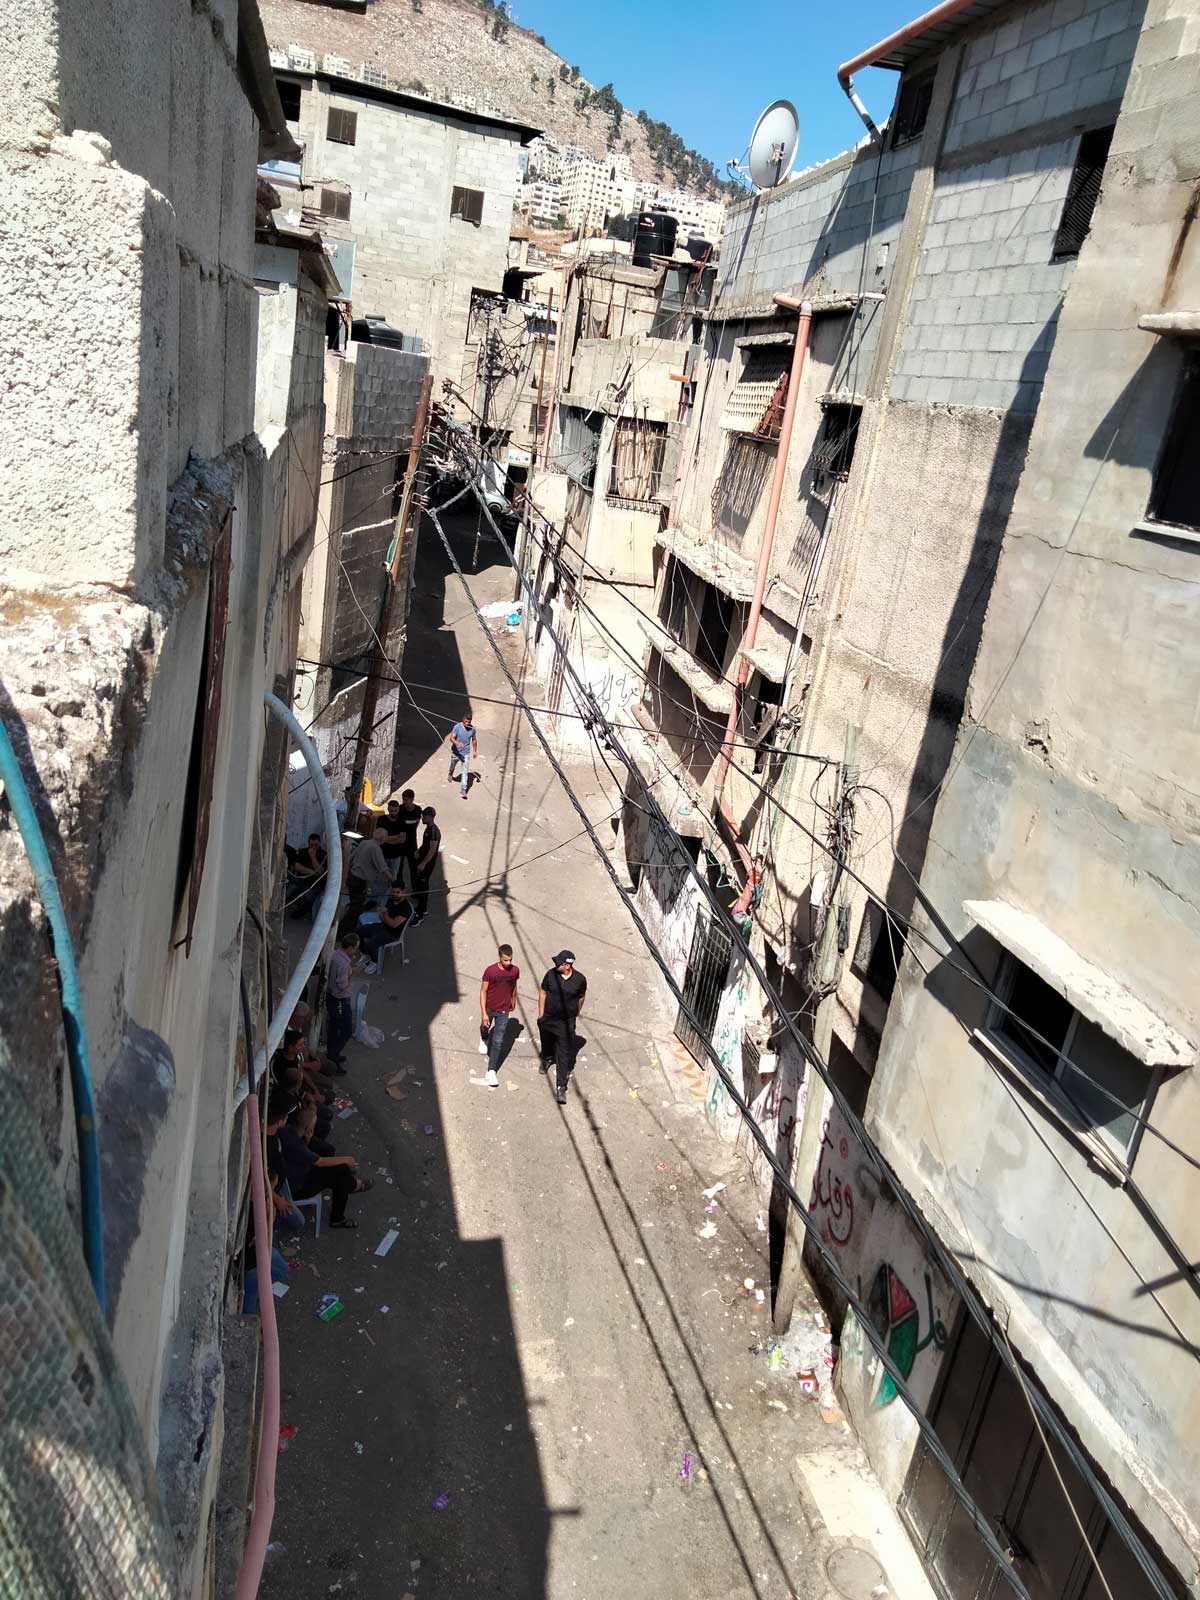 The street from which the soldiers shot at ‘Imad al-Hashash. Photo by Salma a-Deb’i, B’Tselem, 24 Aug. 2021